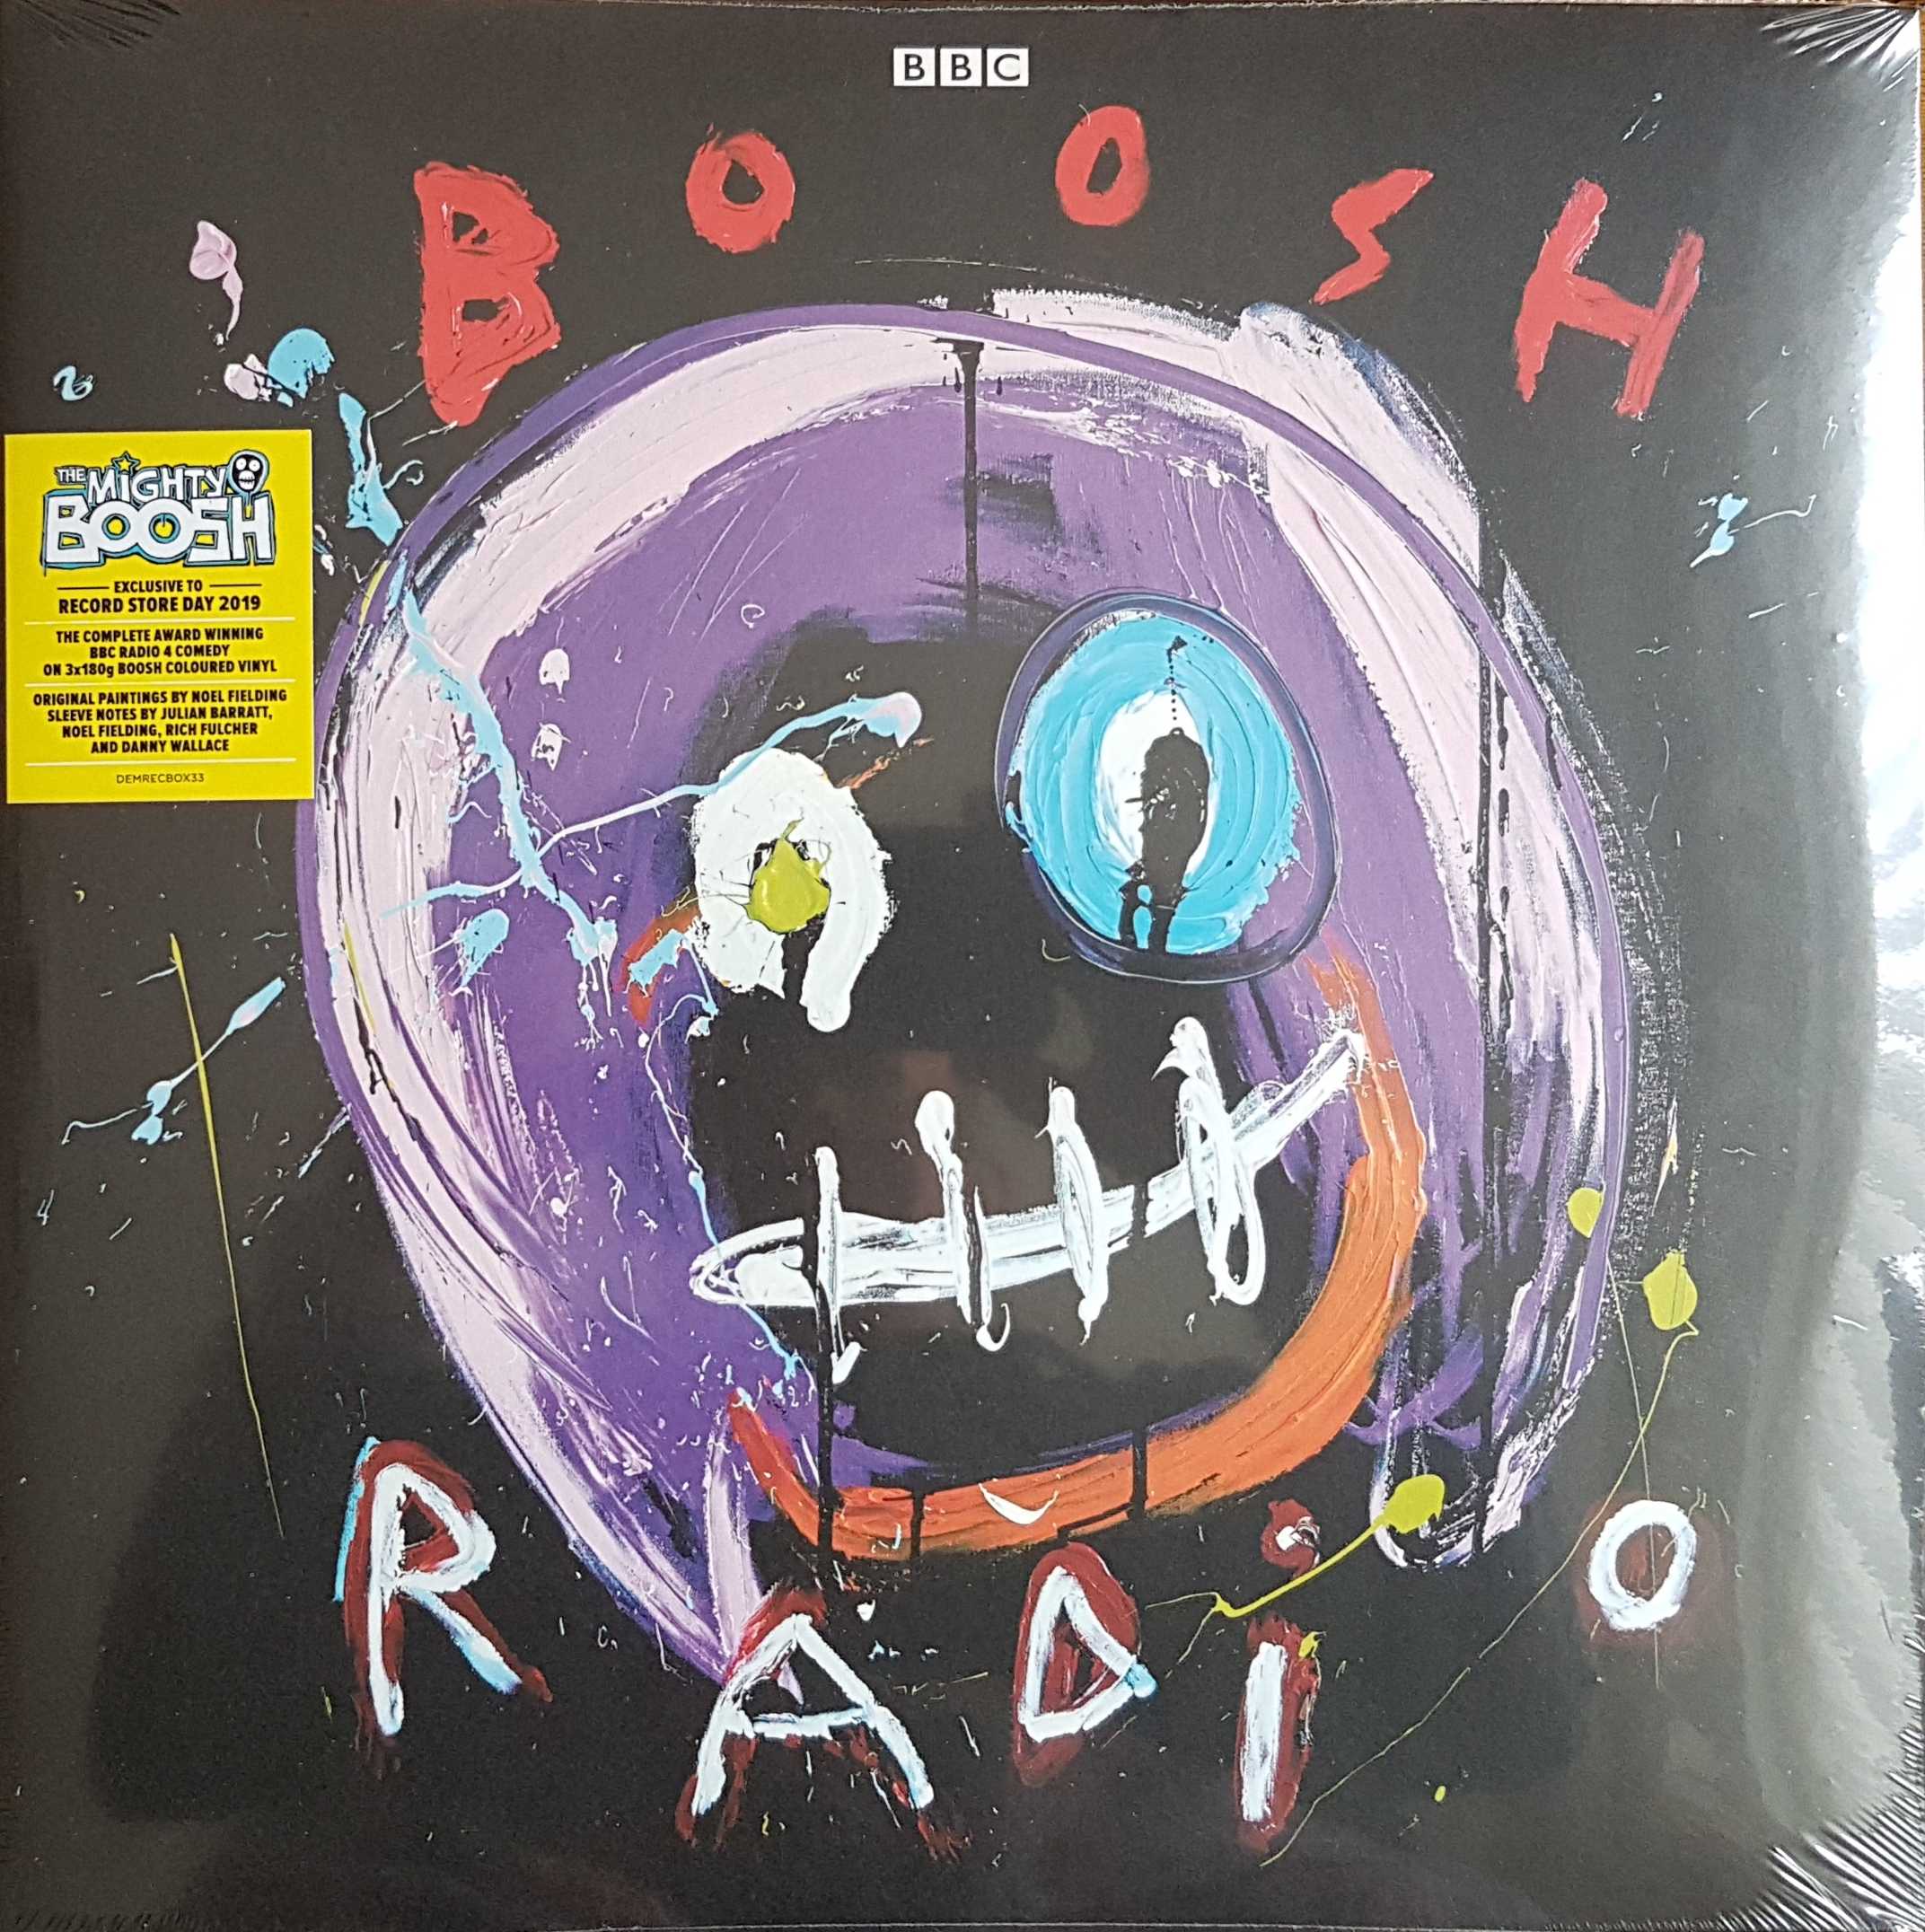 Picture of The complete Boosh radio series by artist Julian Barratt / Noel Fielding from the BBC albums - Records and Tapes library